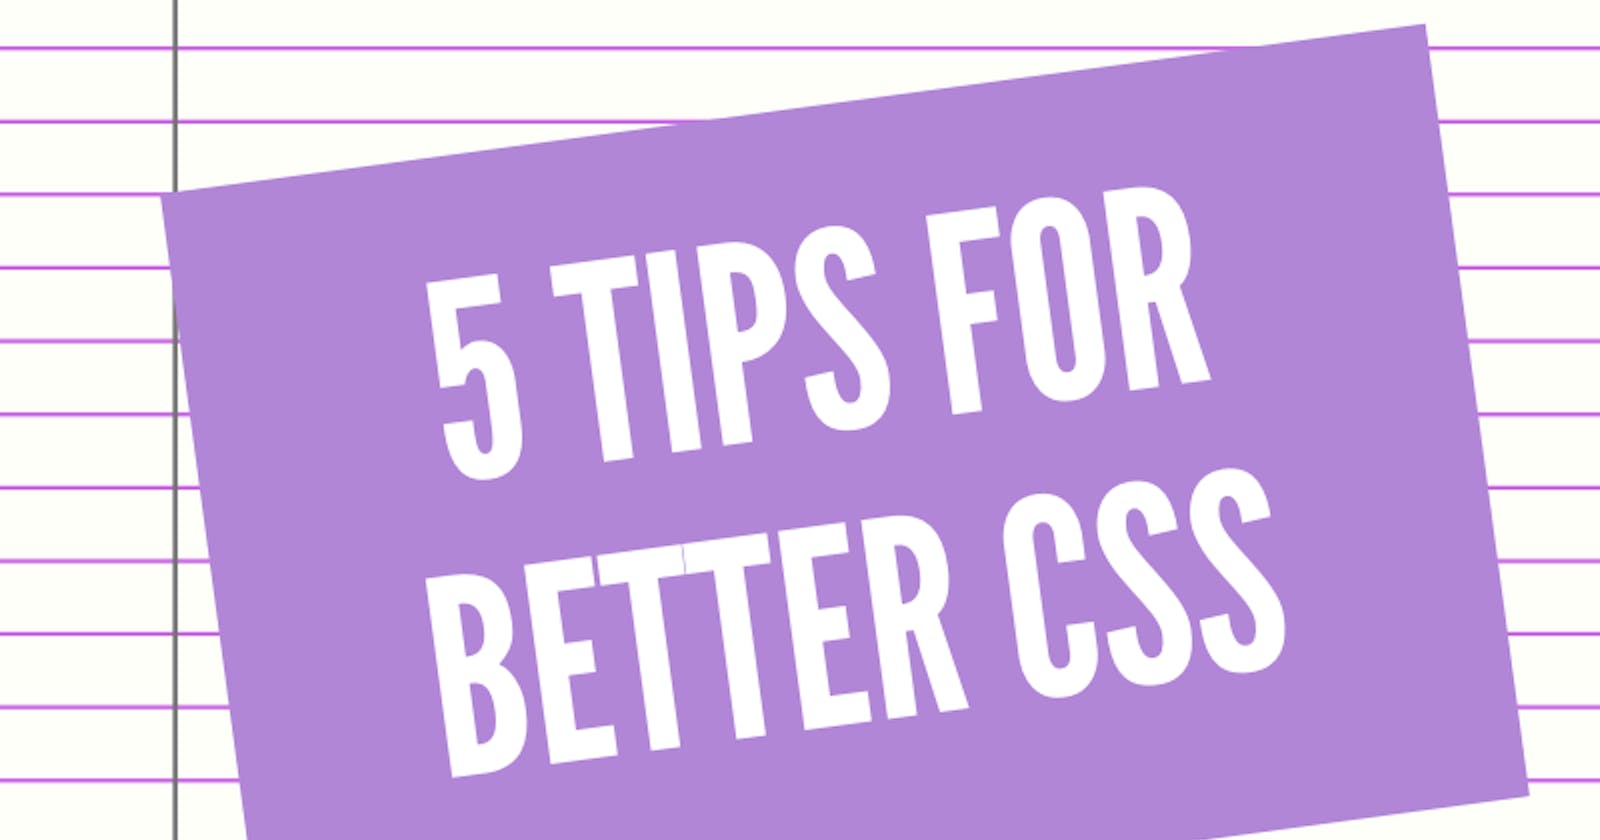 5 tips for writing better CSS